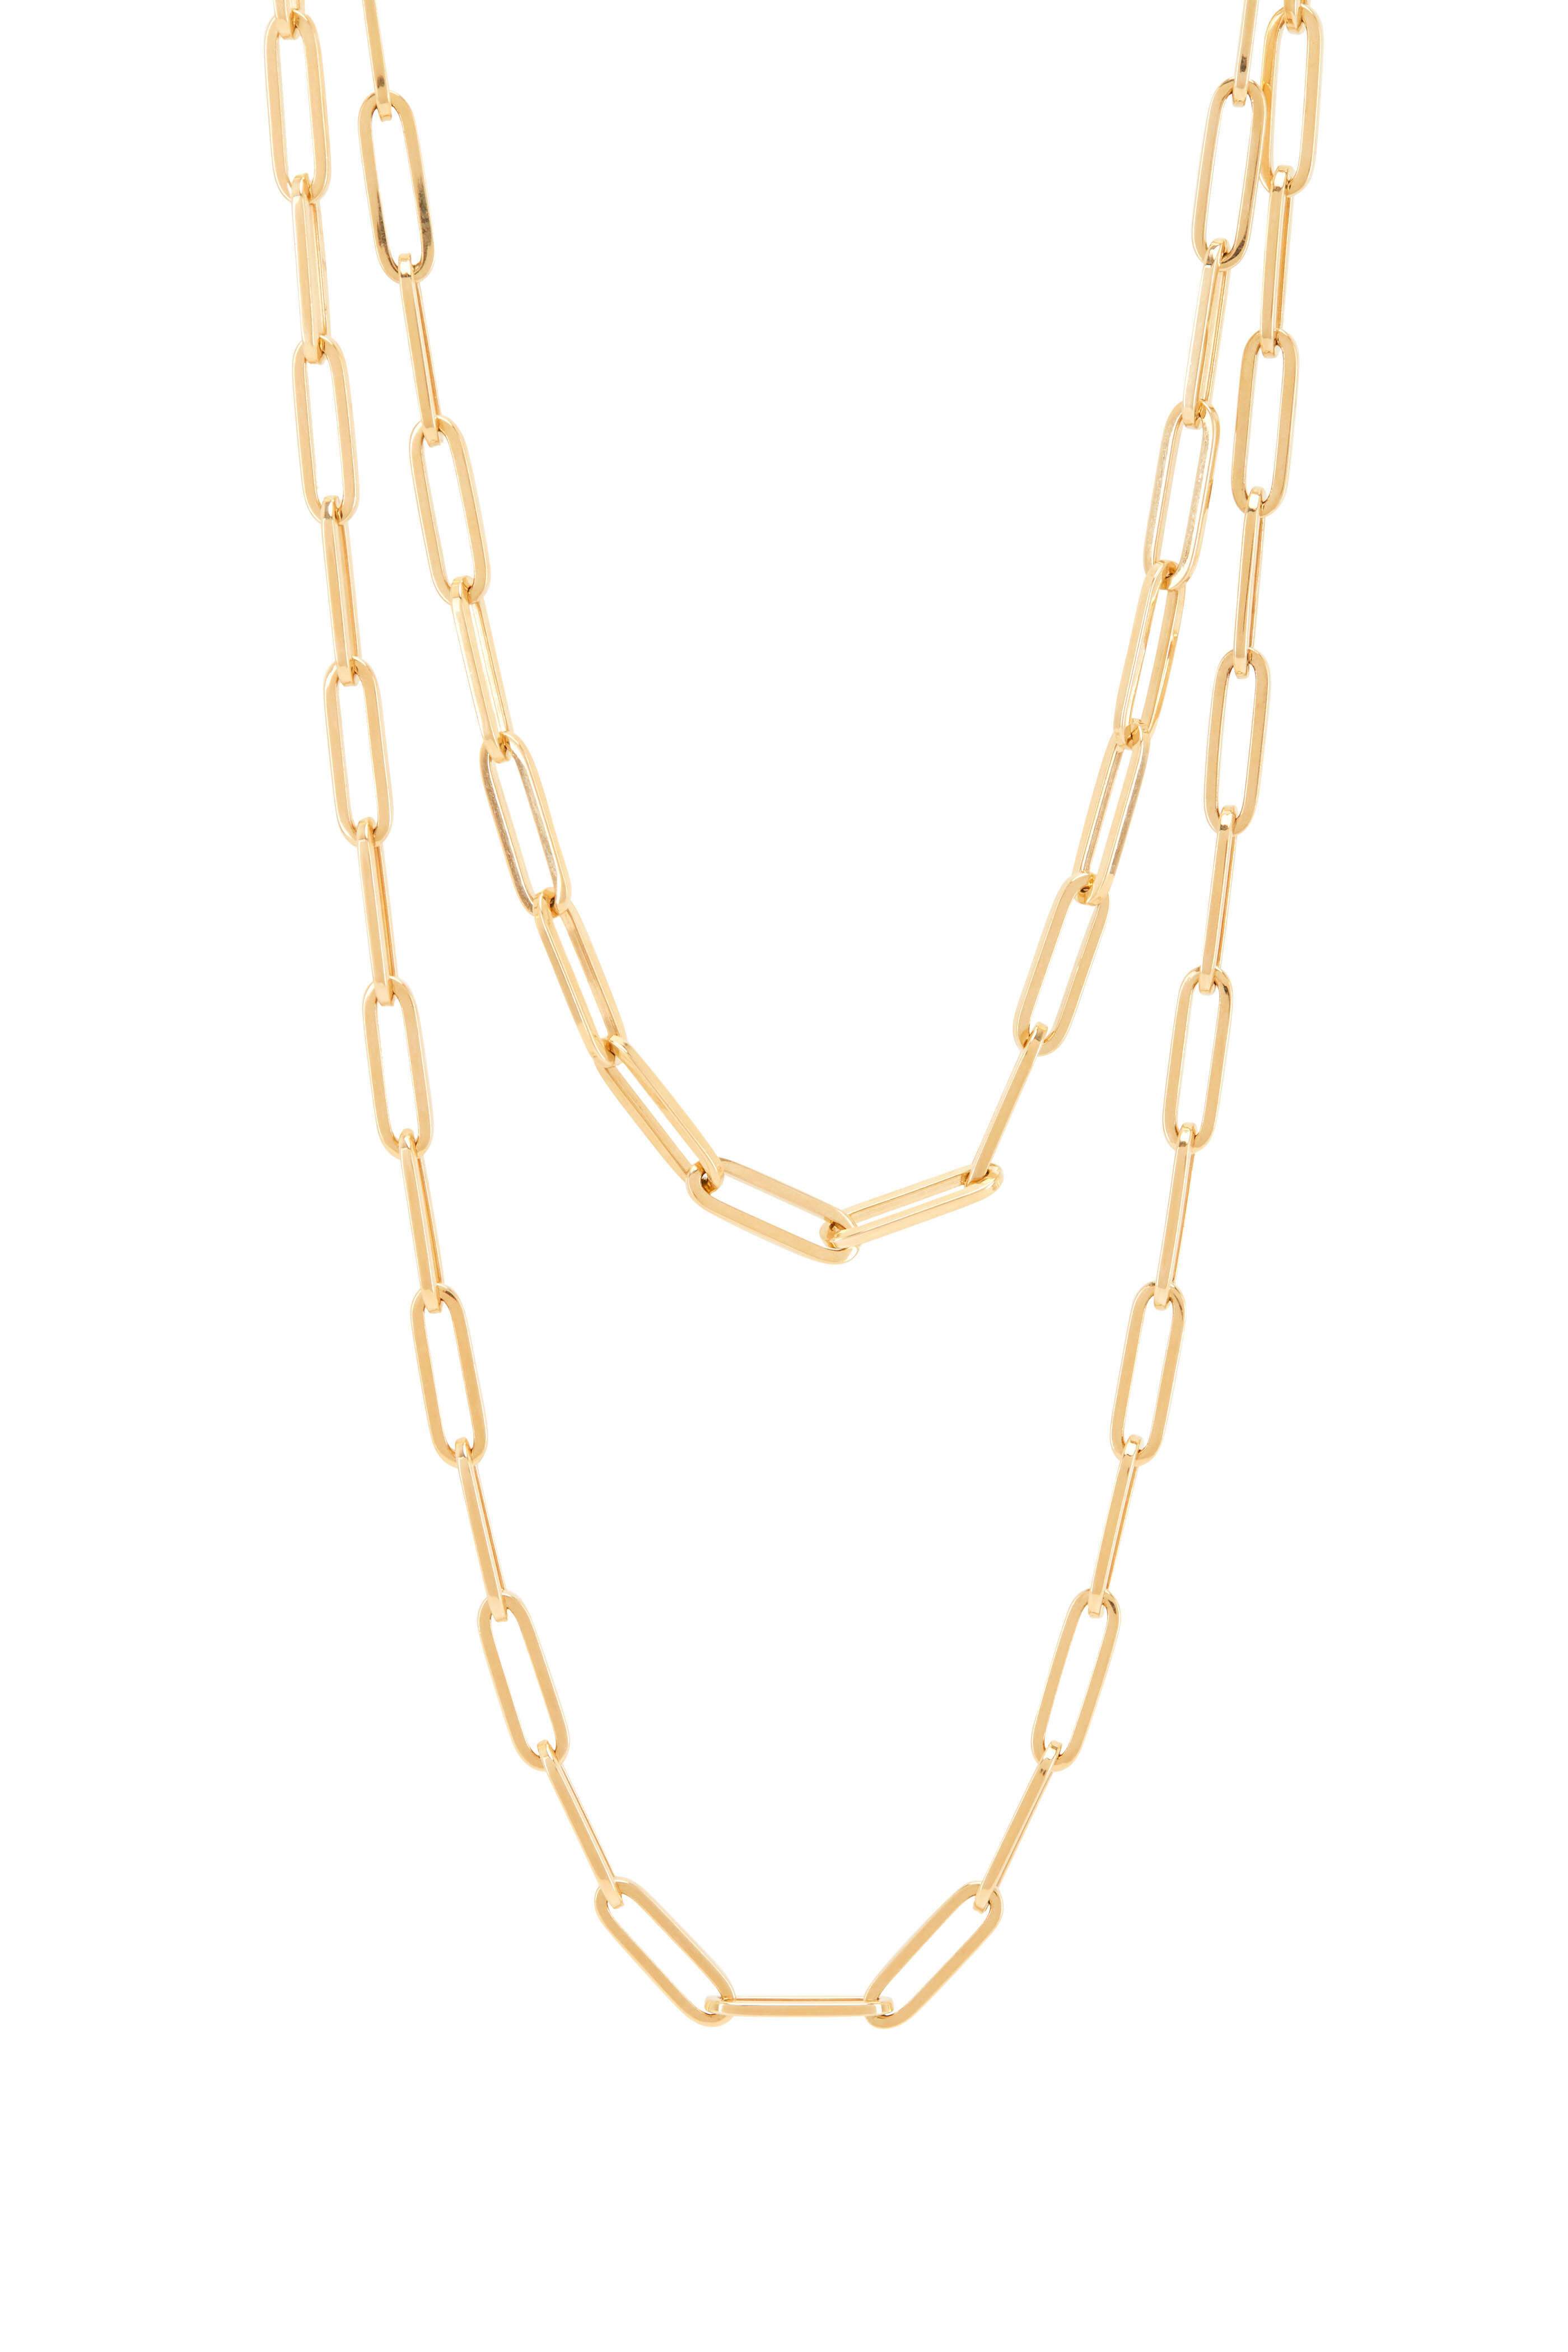 Genevieve Lau - Large Link Chain Necklace | Mitchell Stores